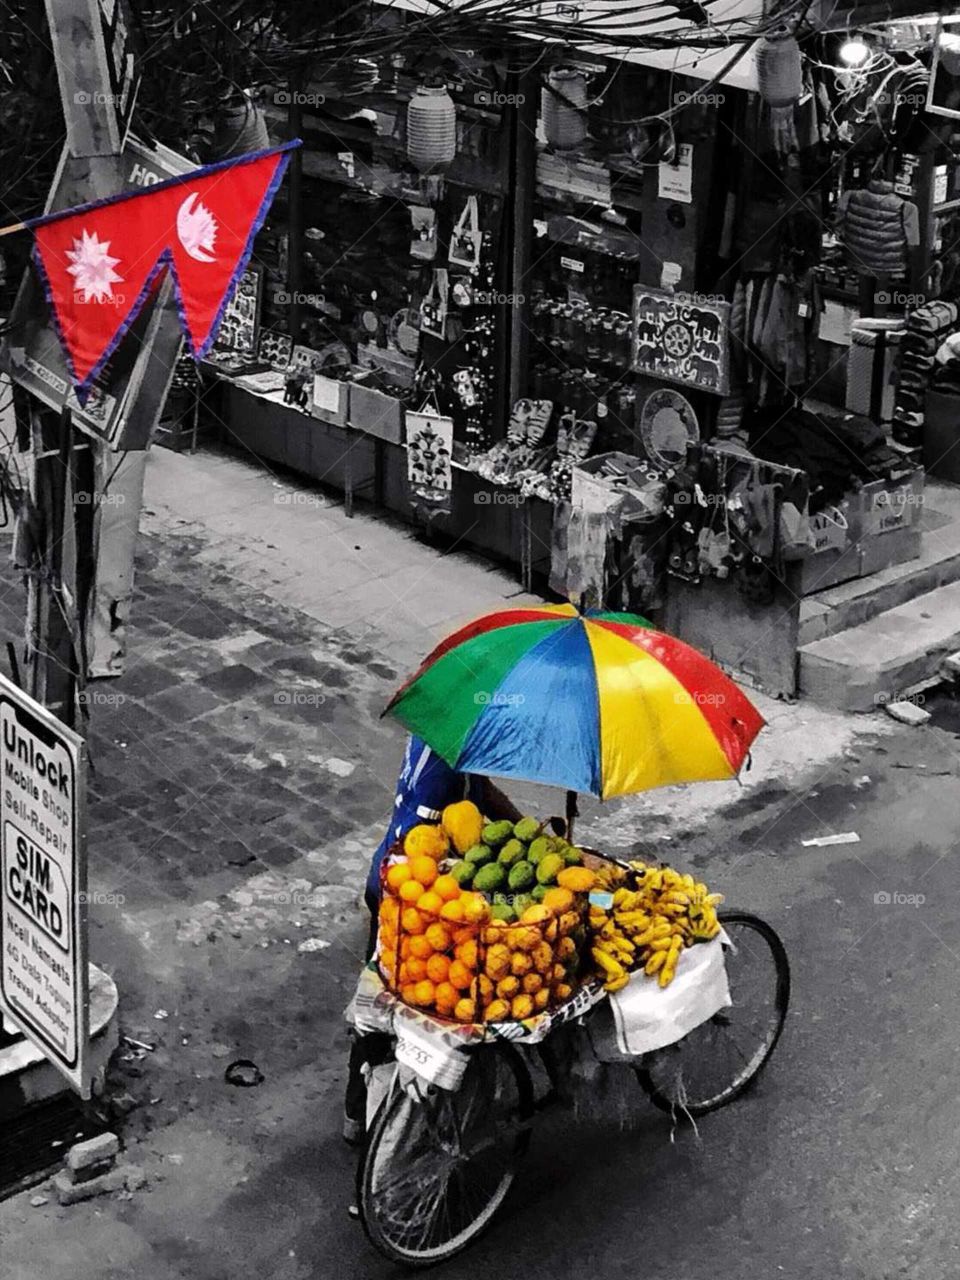 Selling fruits on street during rain, struggling to have better life.